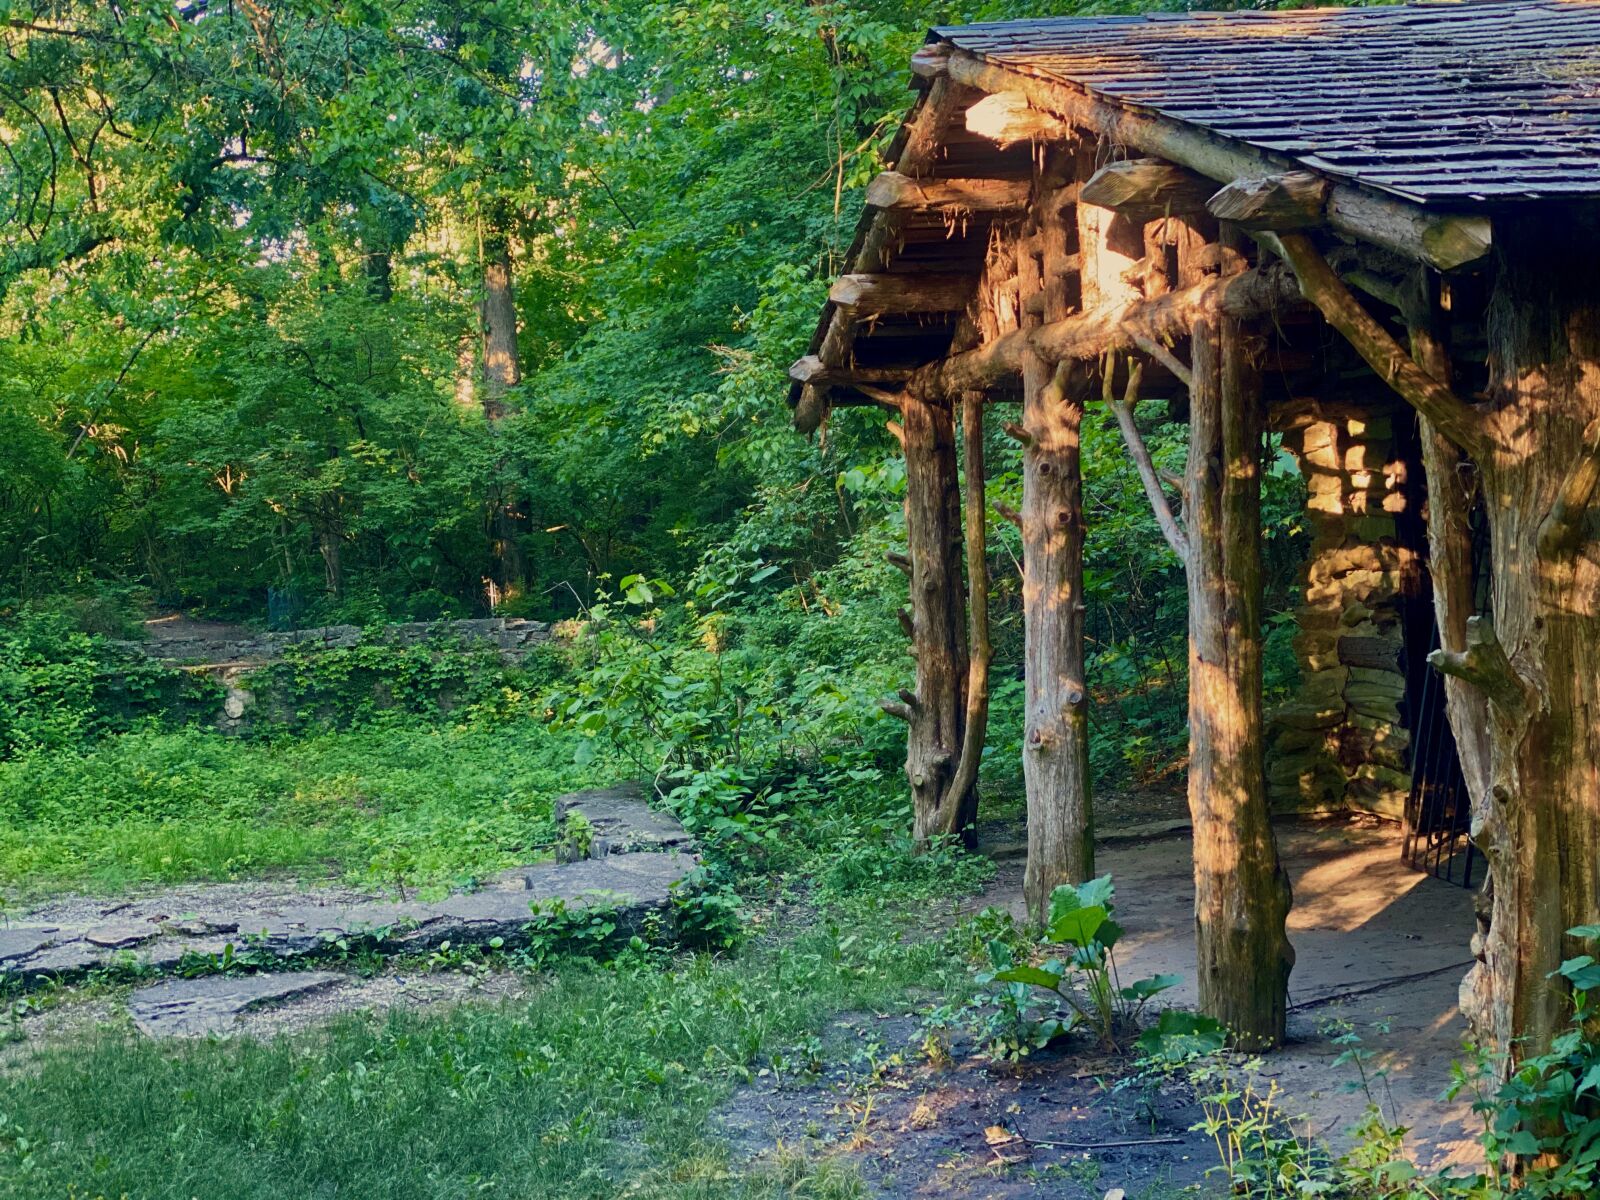 Apple iPhone 11 Pro + iPhone 11 Pro back dual camera 6mm f/2 sample photo. Cabin ruins in woods photography